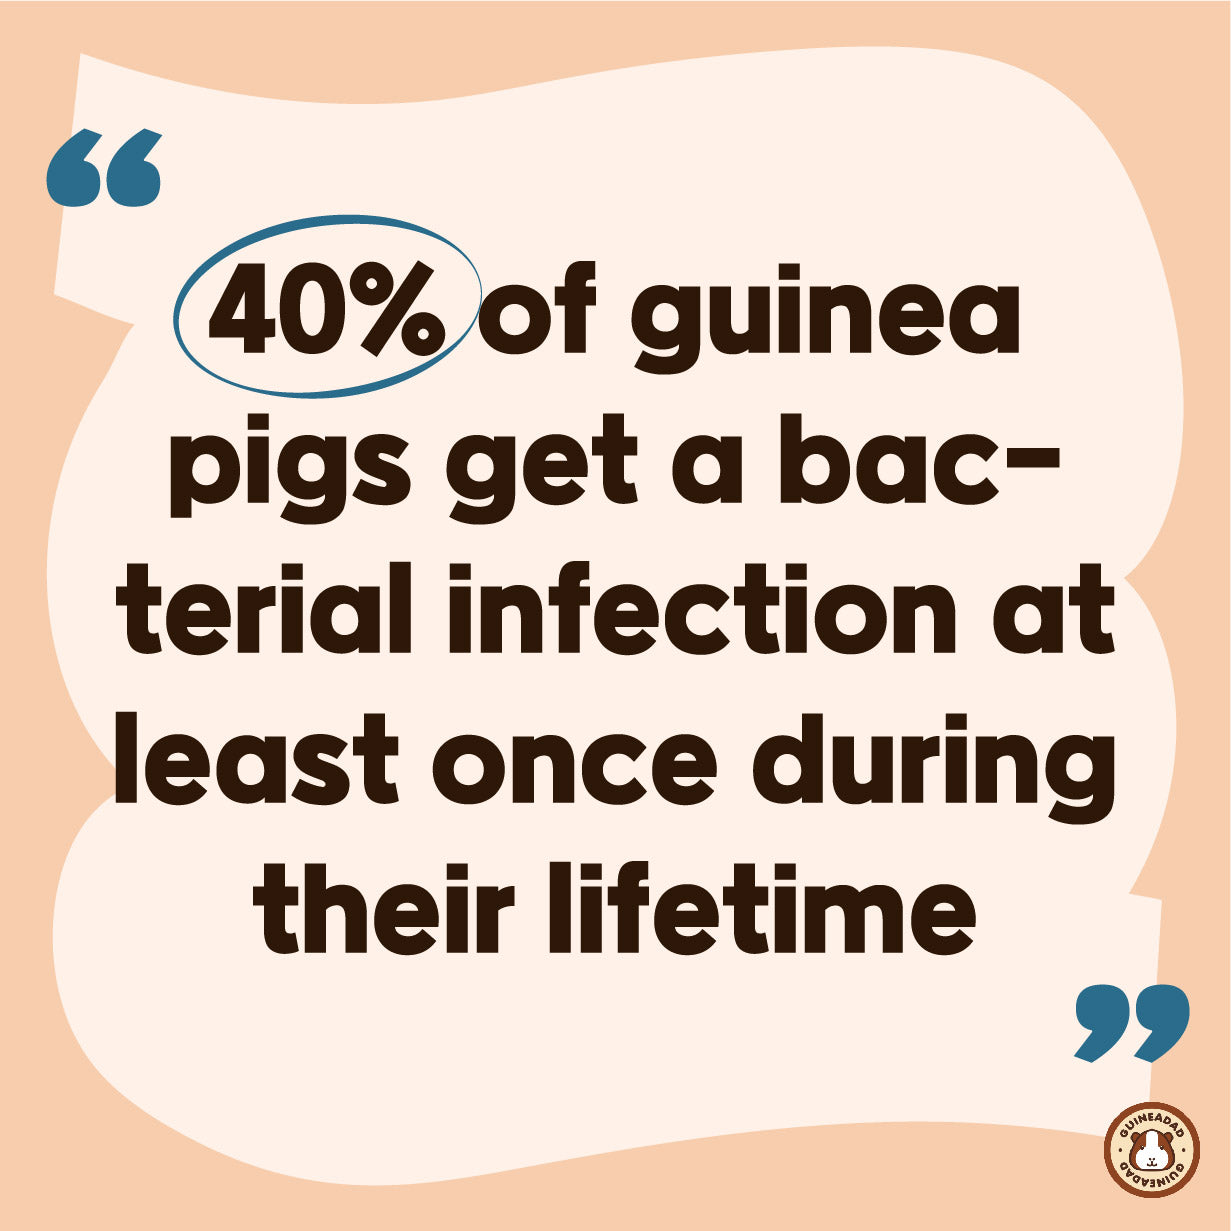 40% of guinea pigs get a bacterial infection at least once during their lifetime